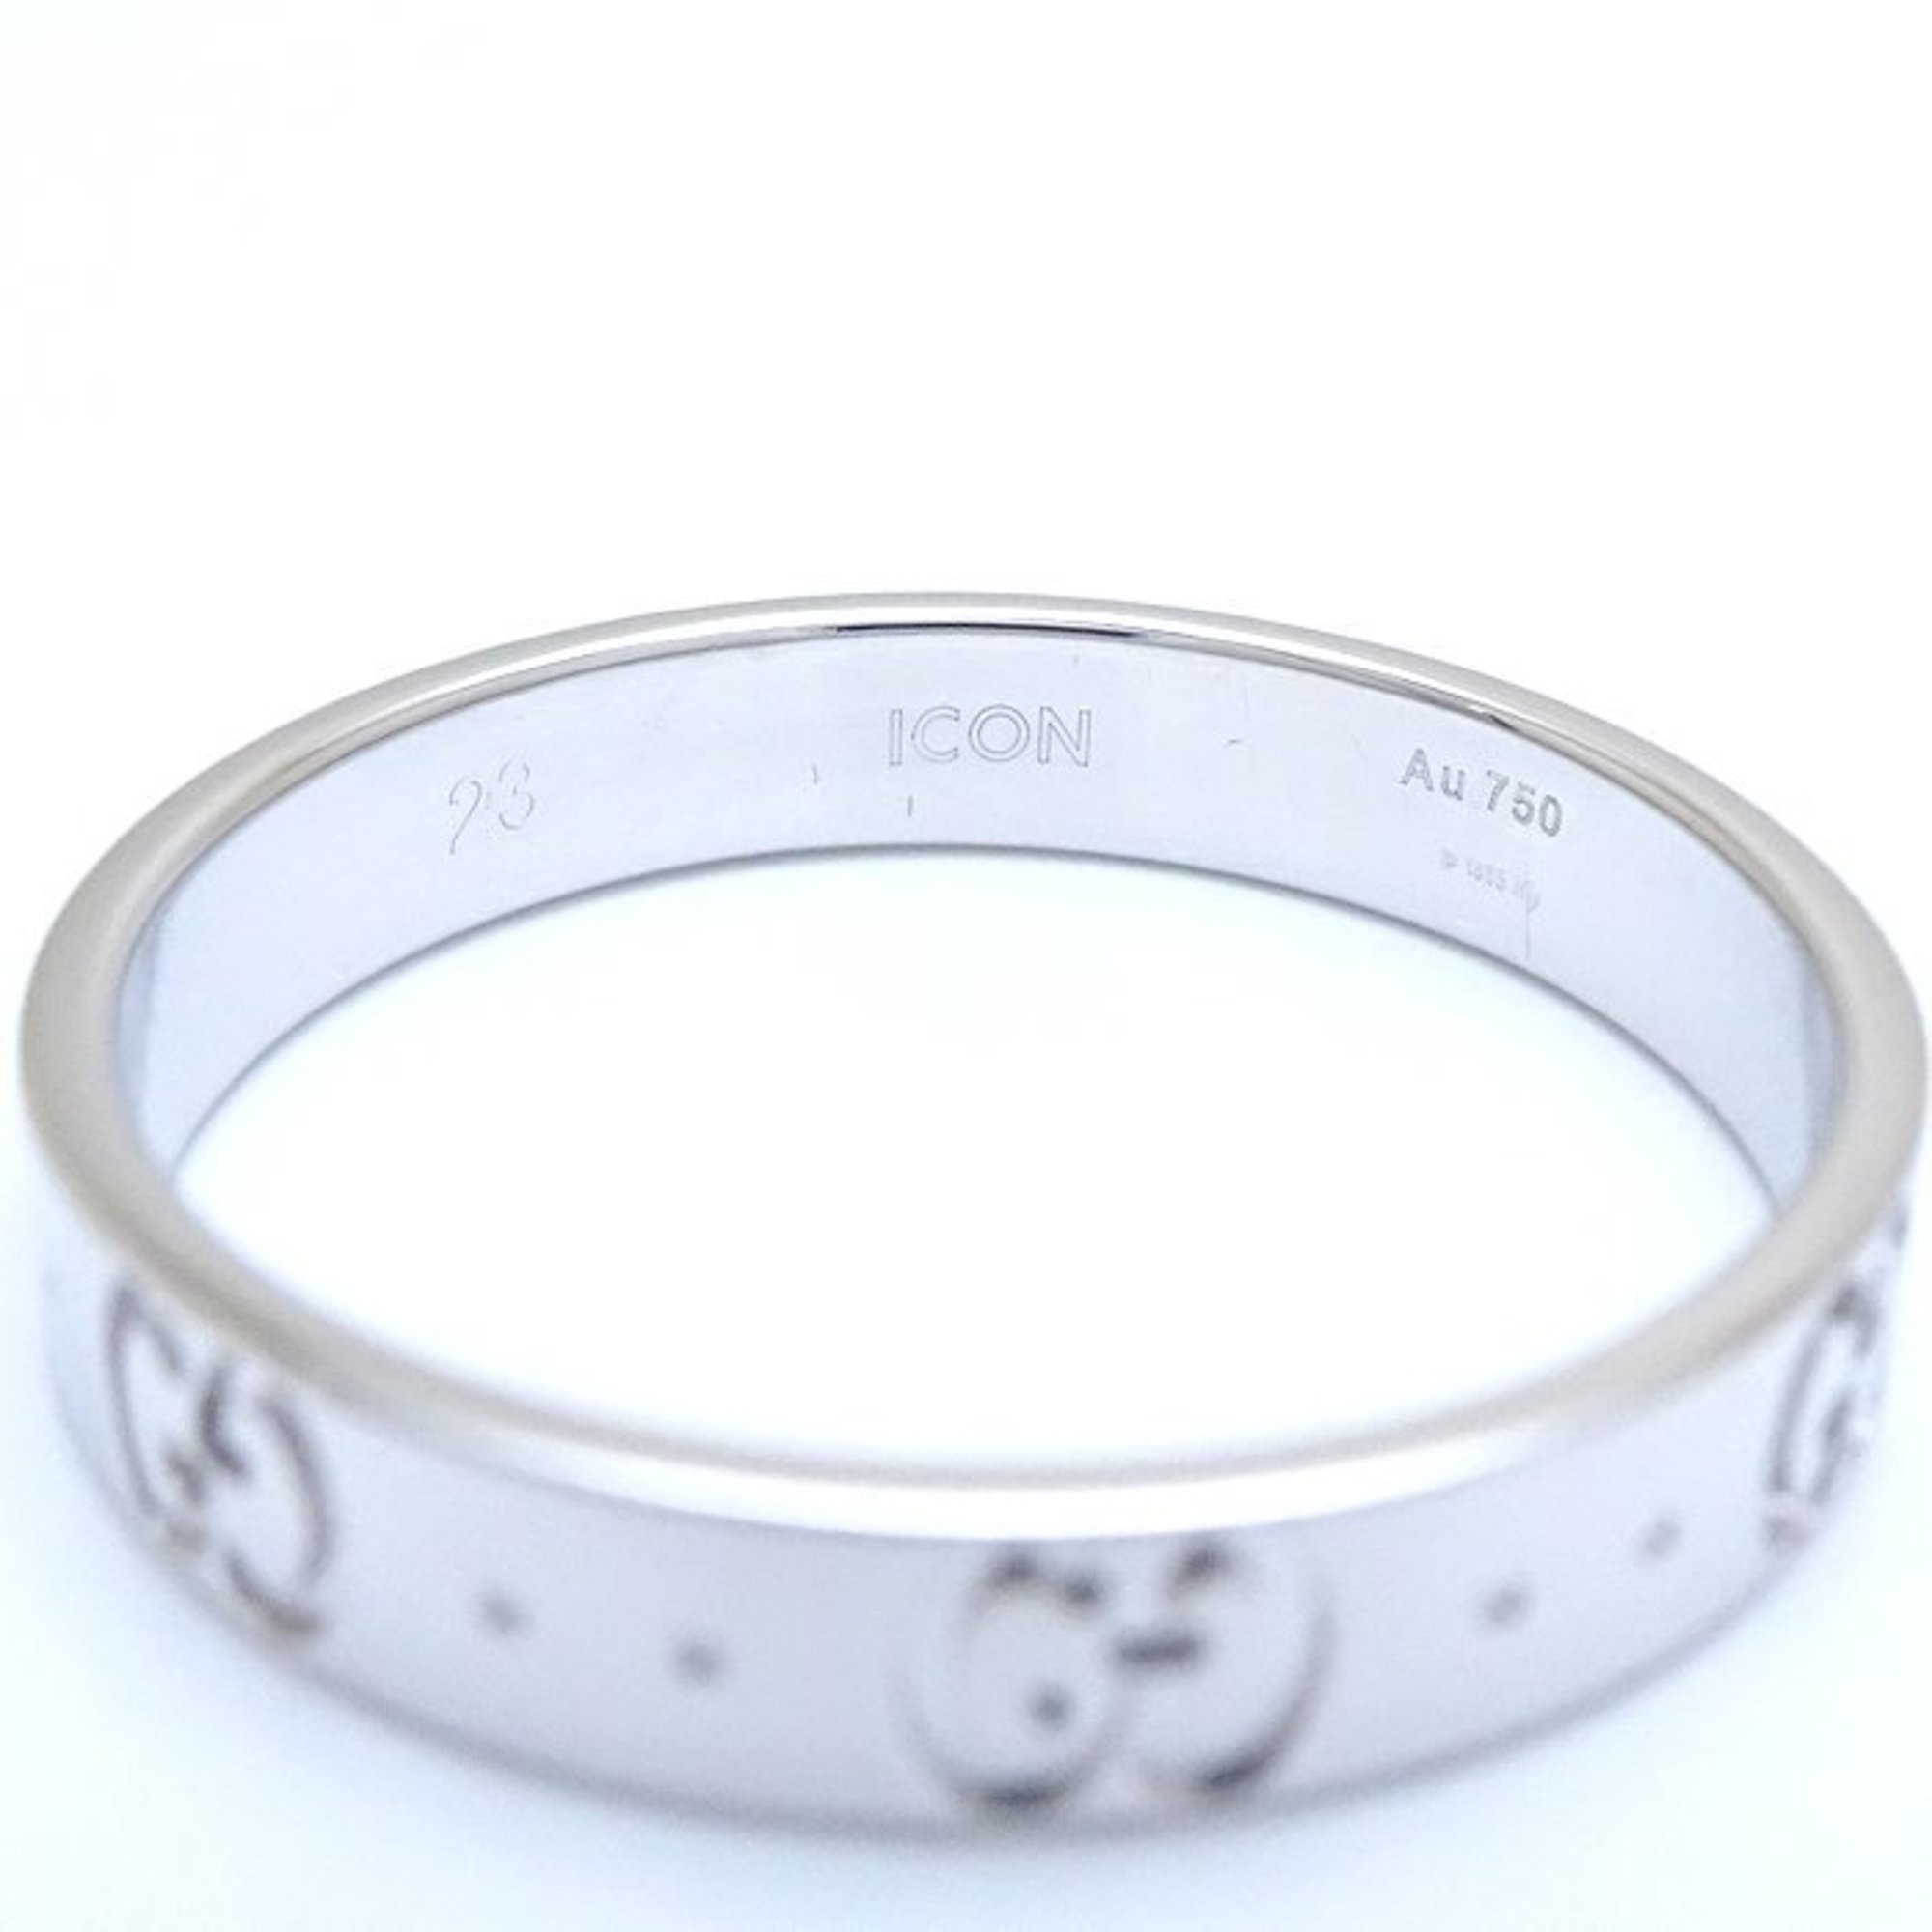 GUCCI Icon Ring #23 K18WG White Gold 291786